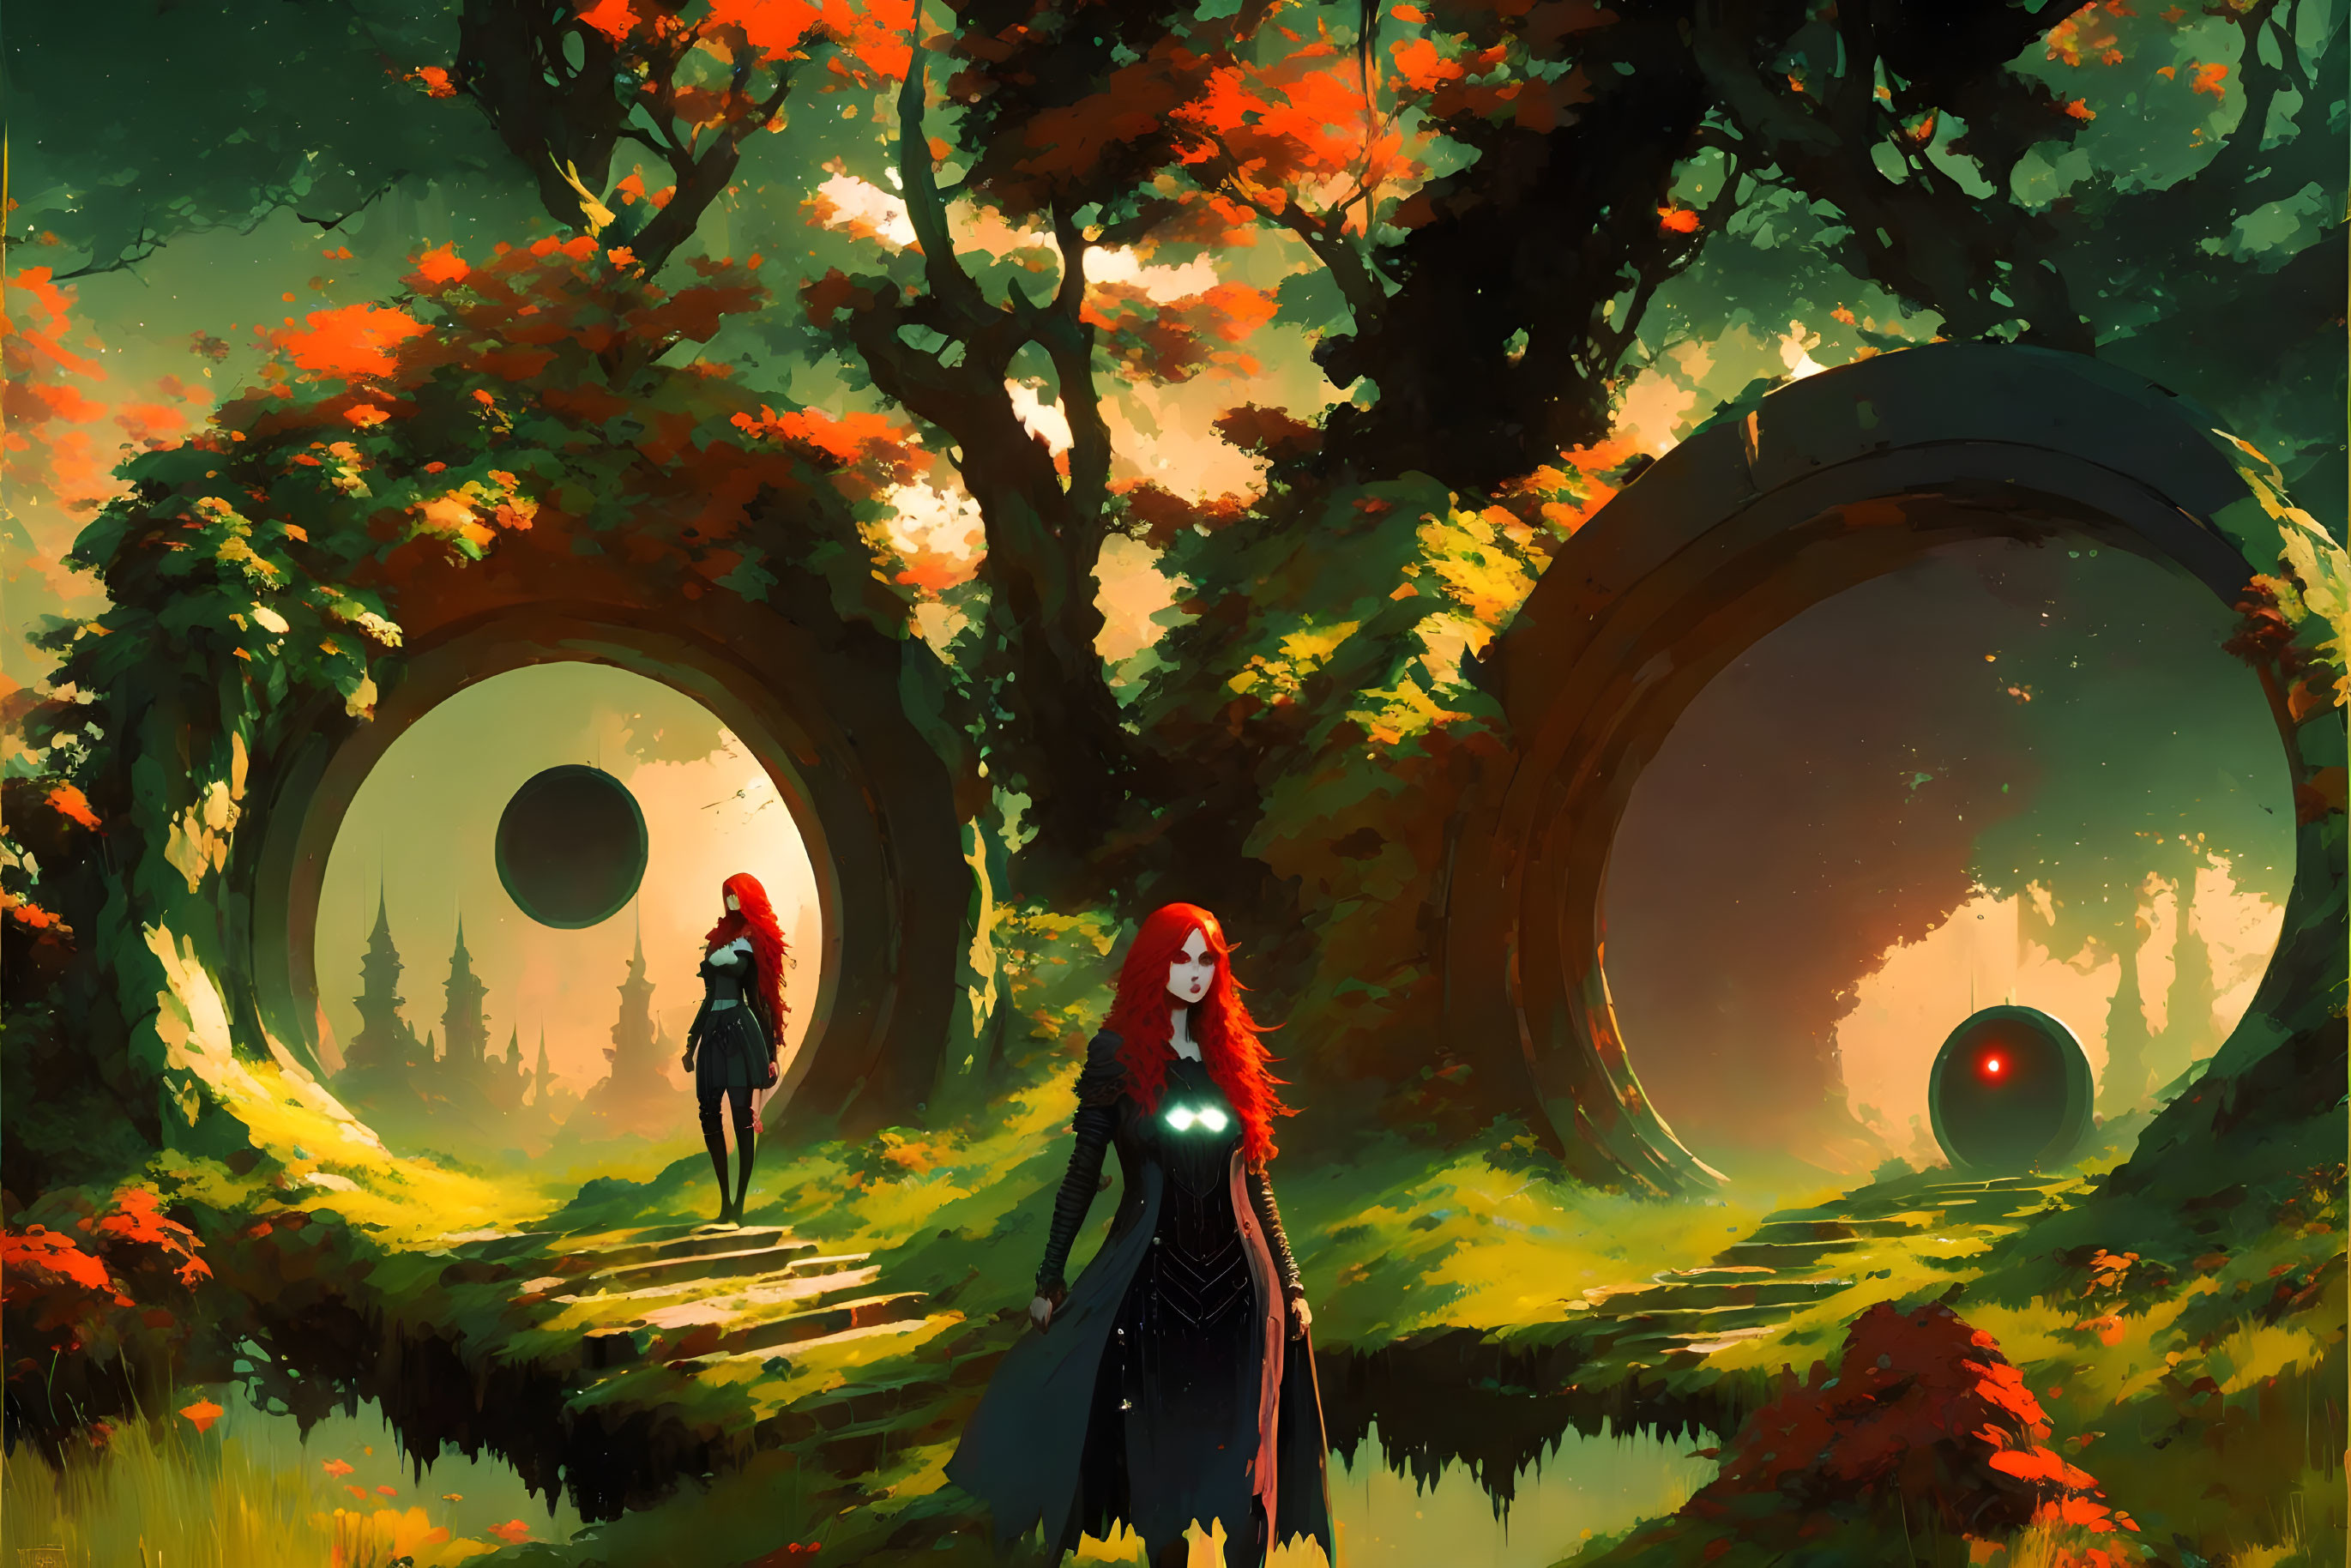 Vibrant forest with two circular gateways, red-haired person, and figure walking.